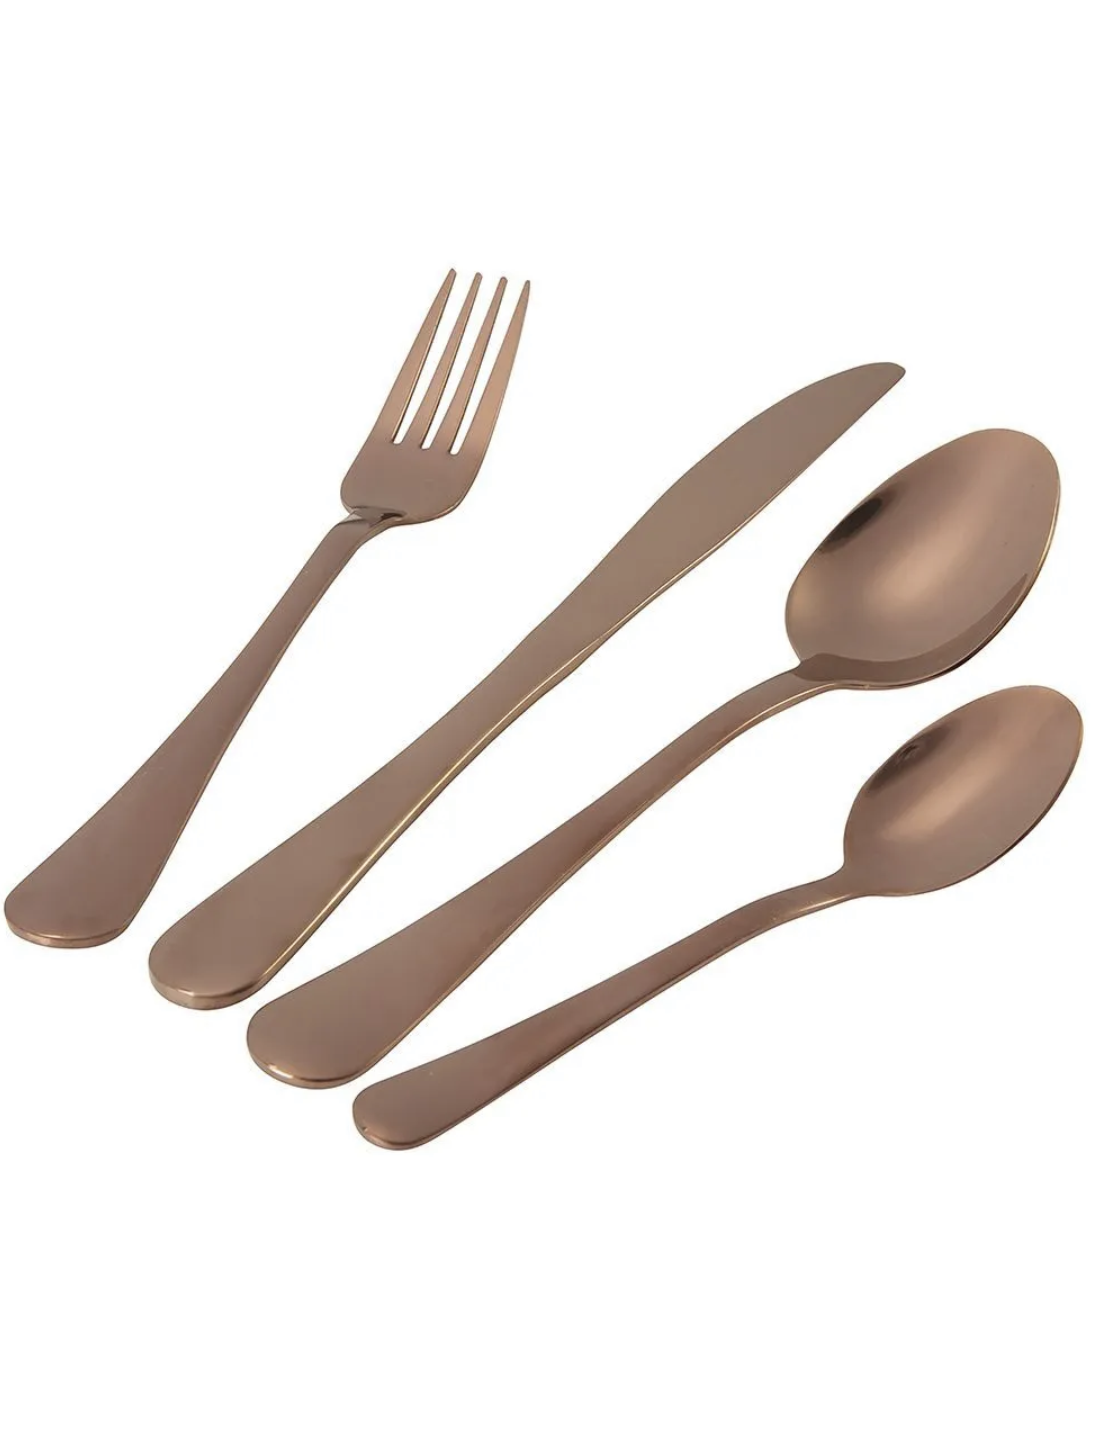 Stainless Steel Cutlery Service 24 Pieces Copper